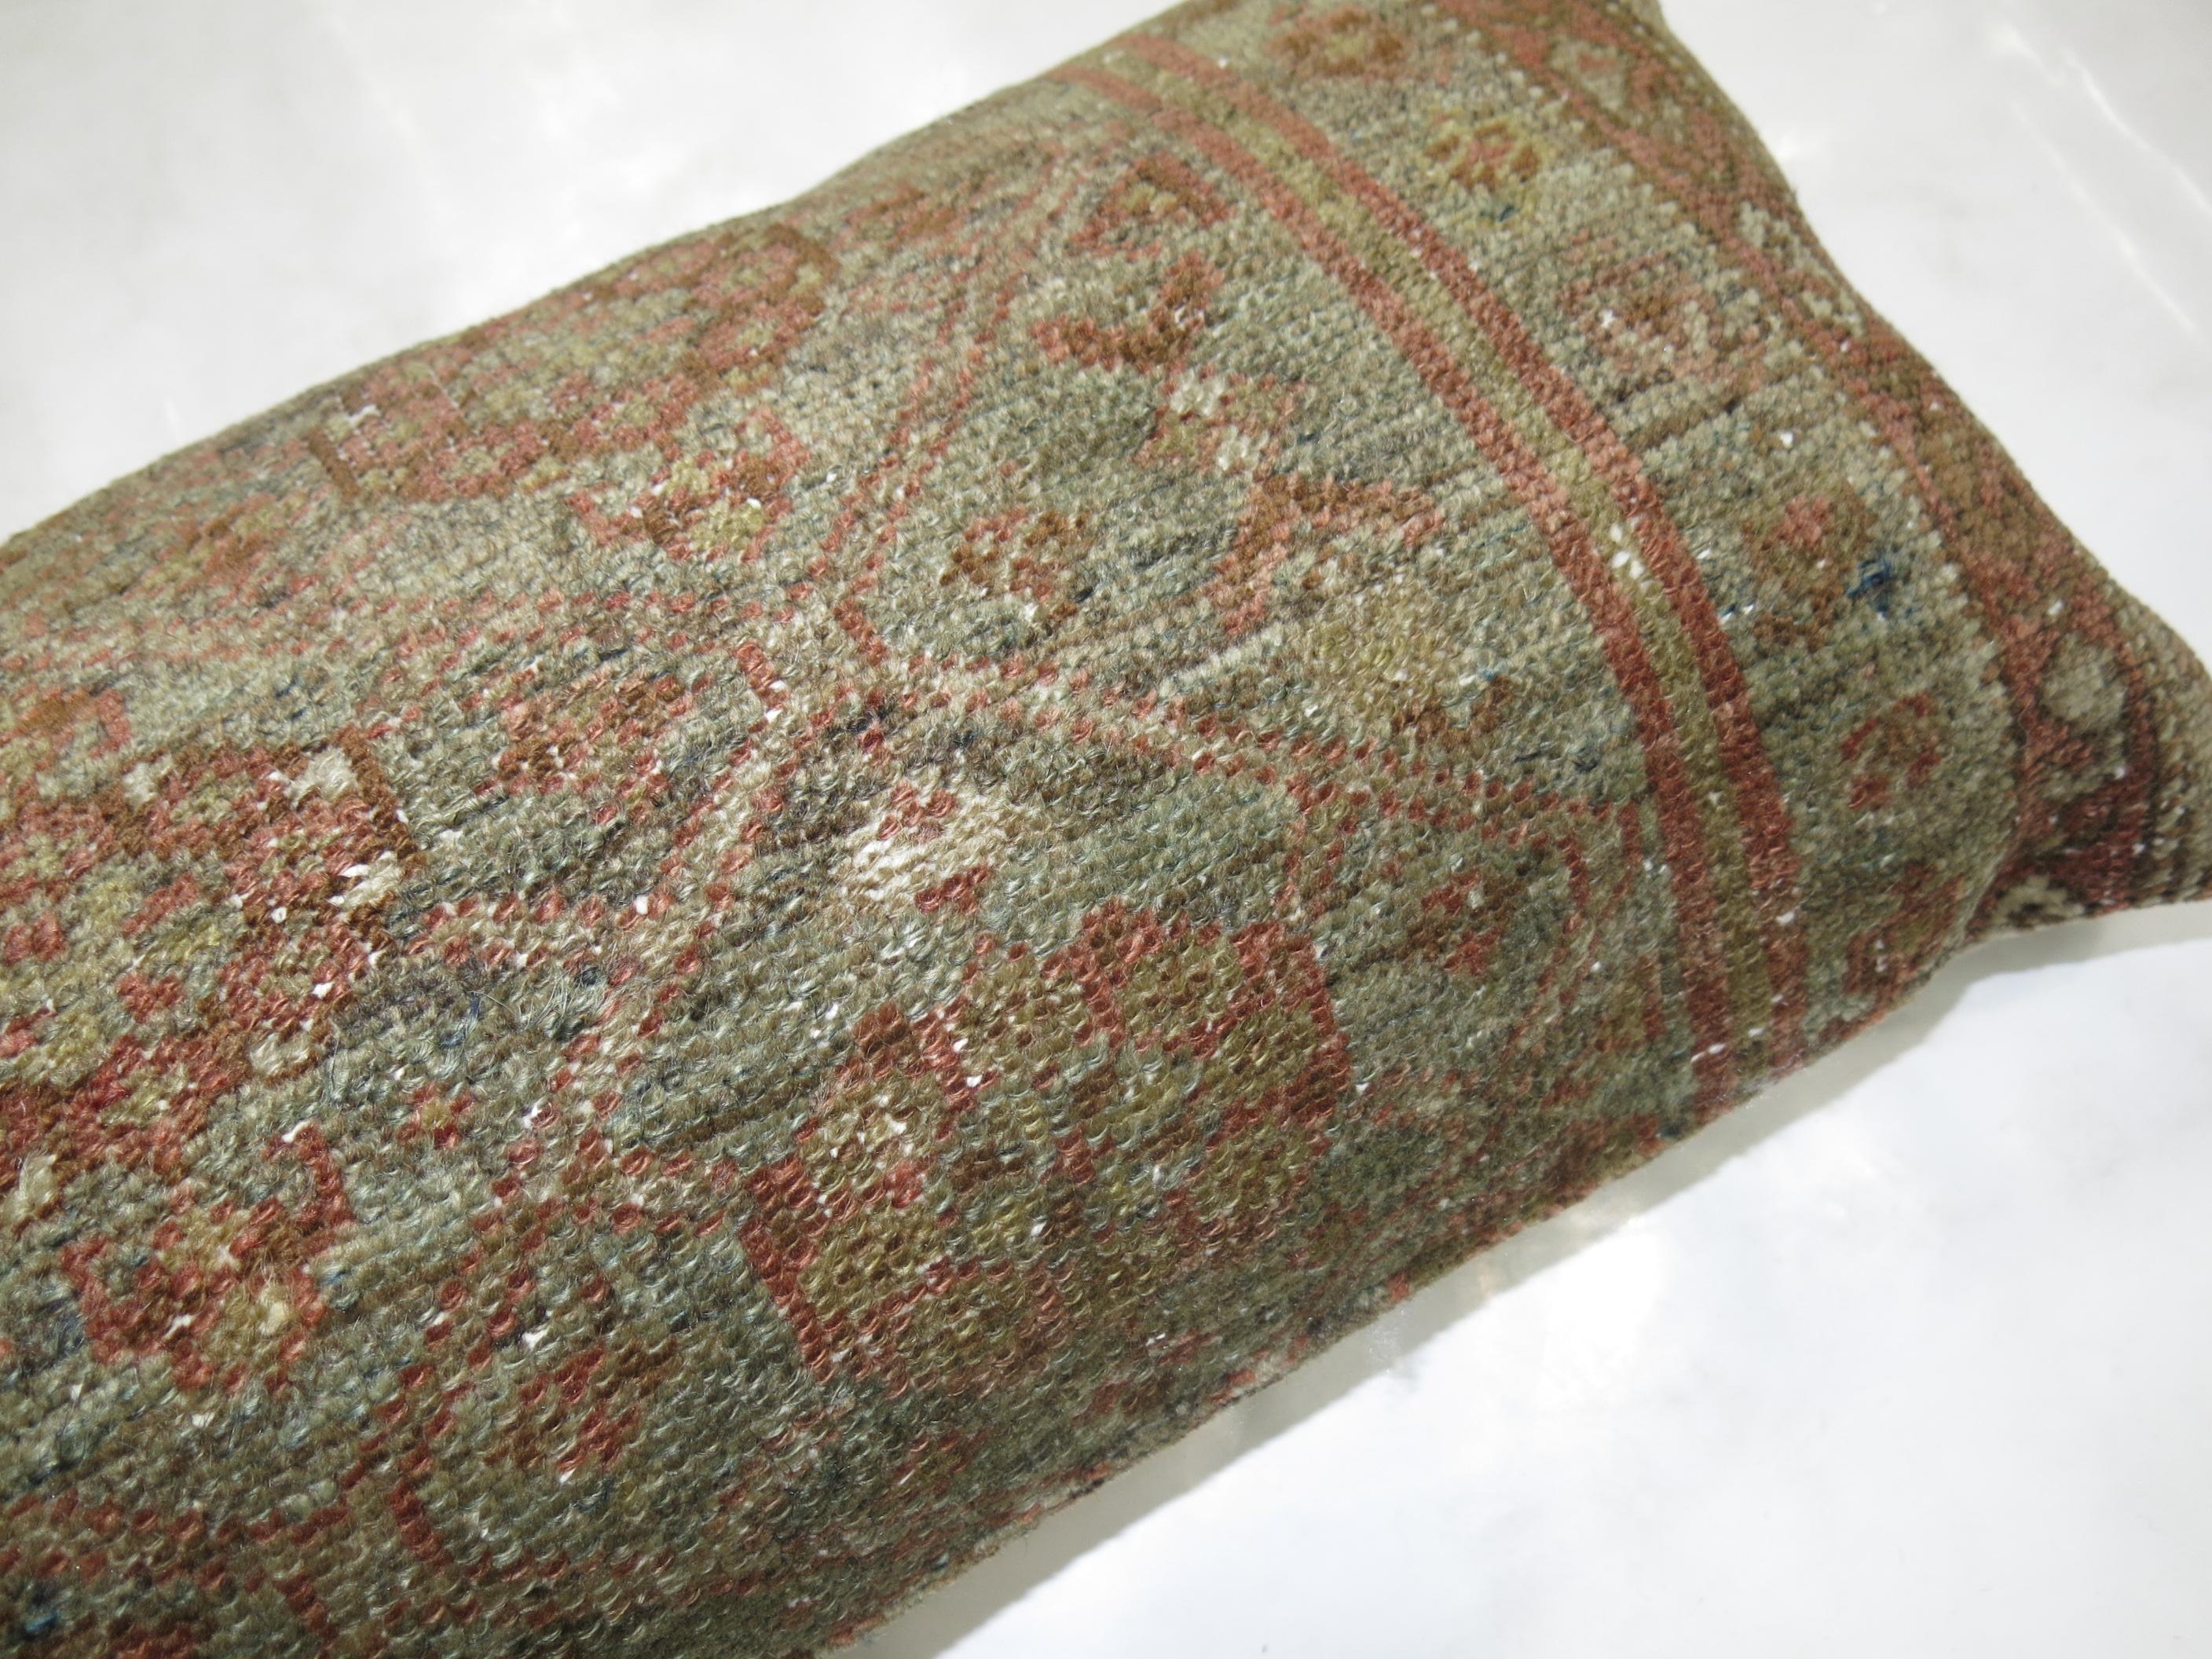  Narrow Antique Persian Bolster Rug Pillow In Good Condition For Sale In New York, NY